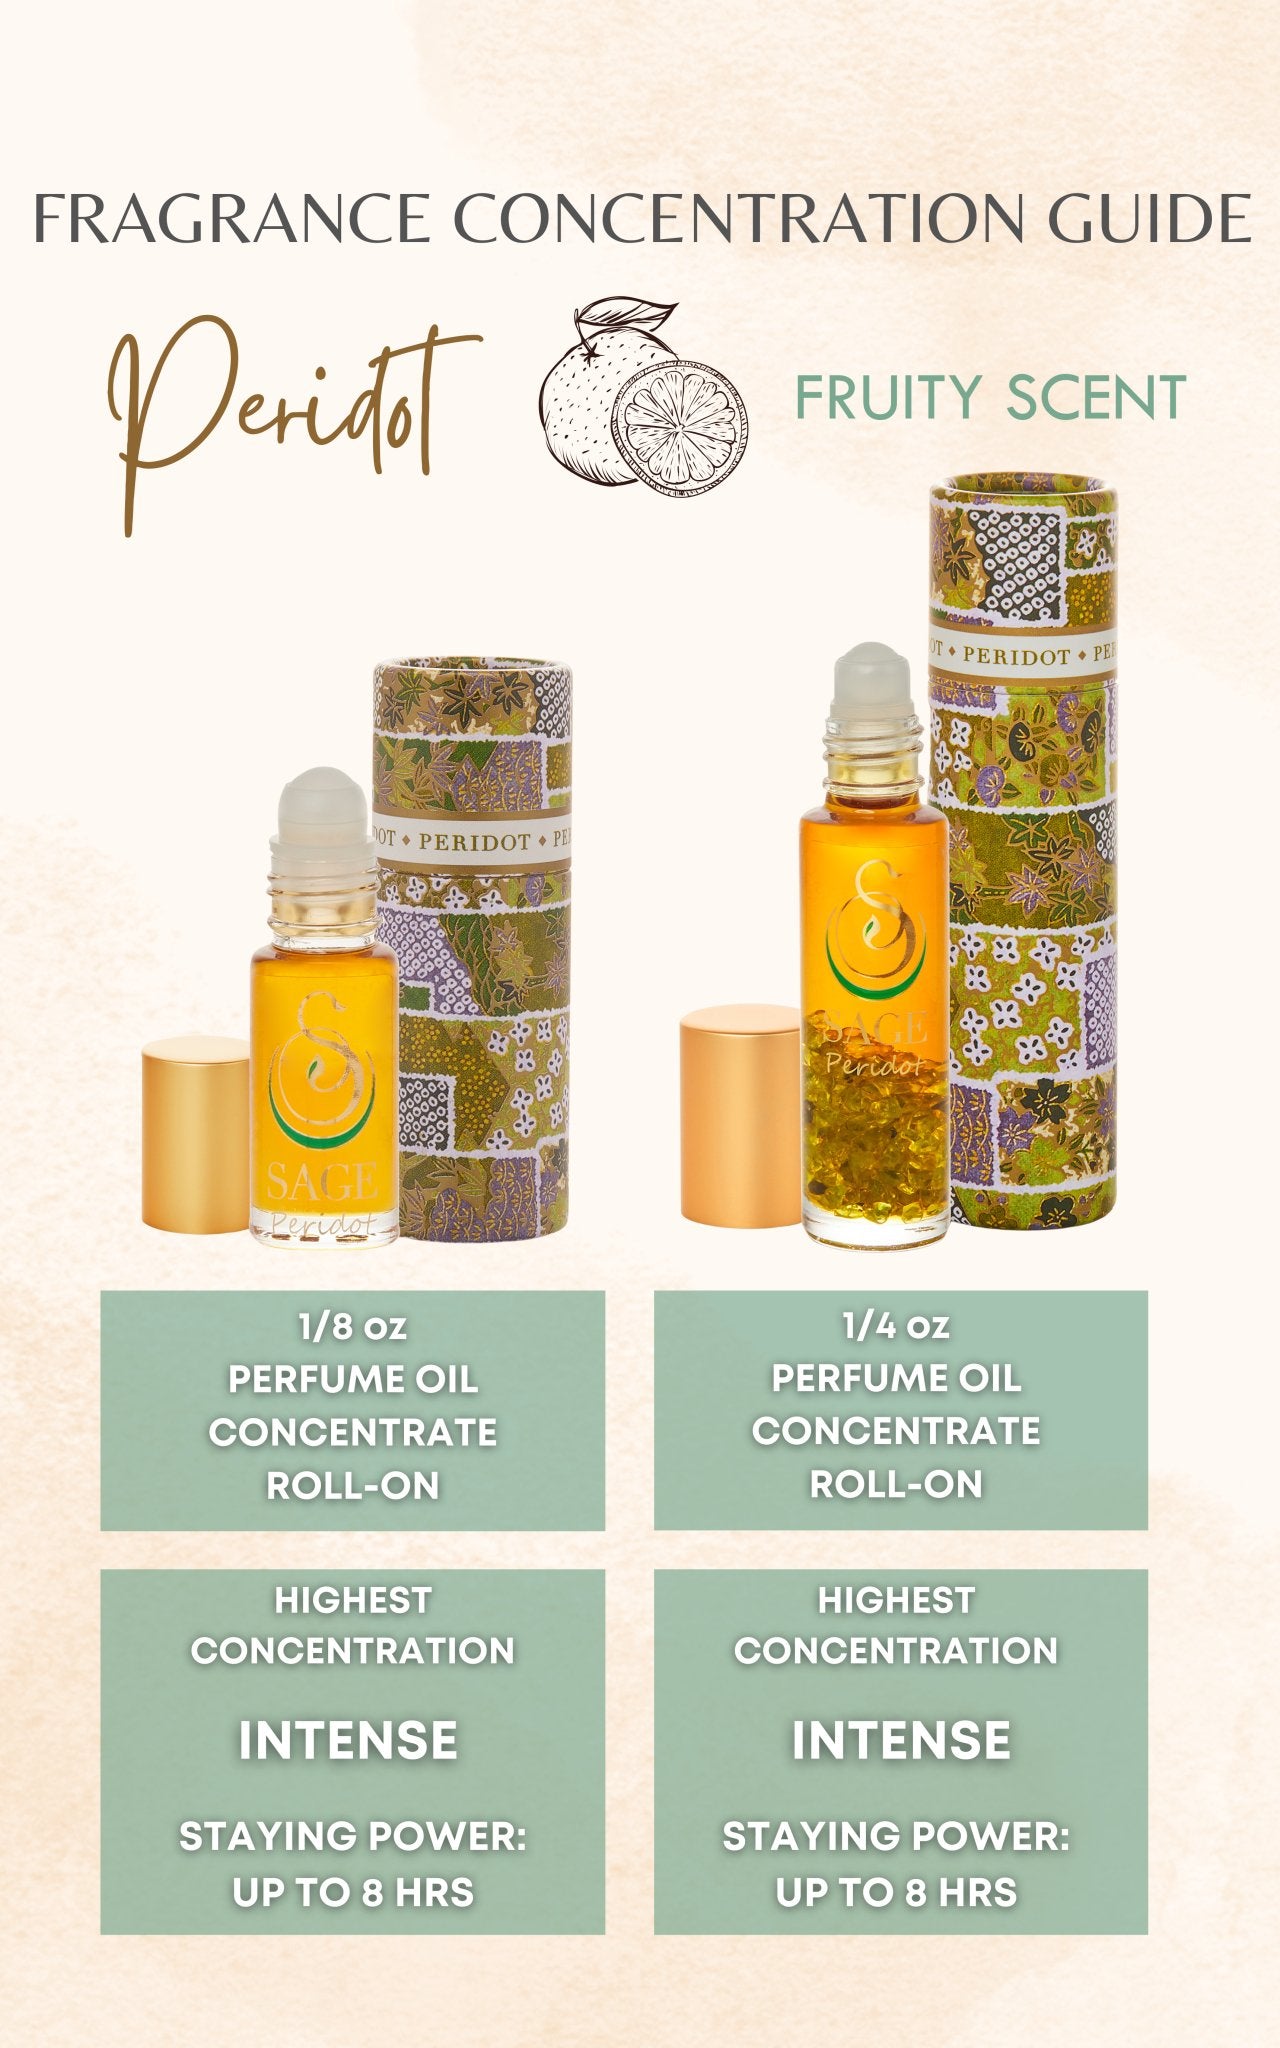 Peridot 1/8 oz Perfume Oil Concentrate Roll-On by Sage - The Sage Lifestyle